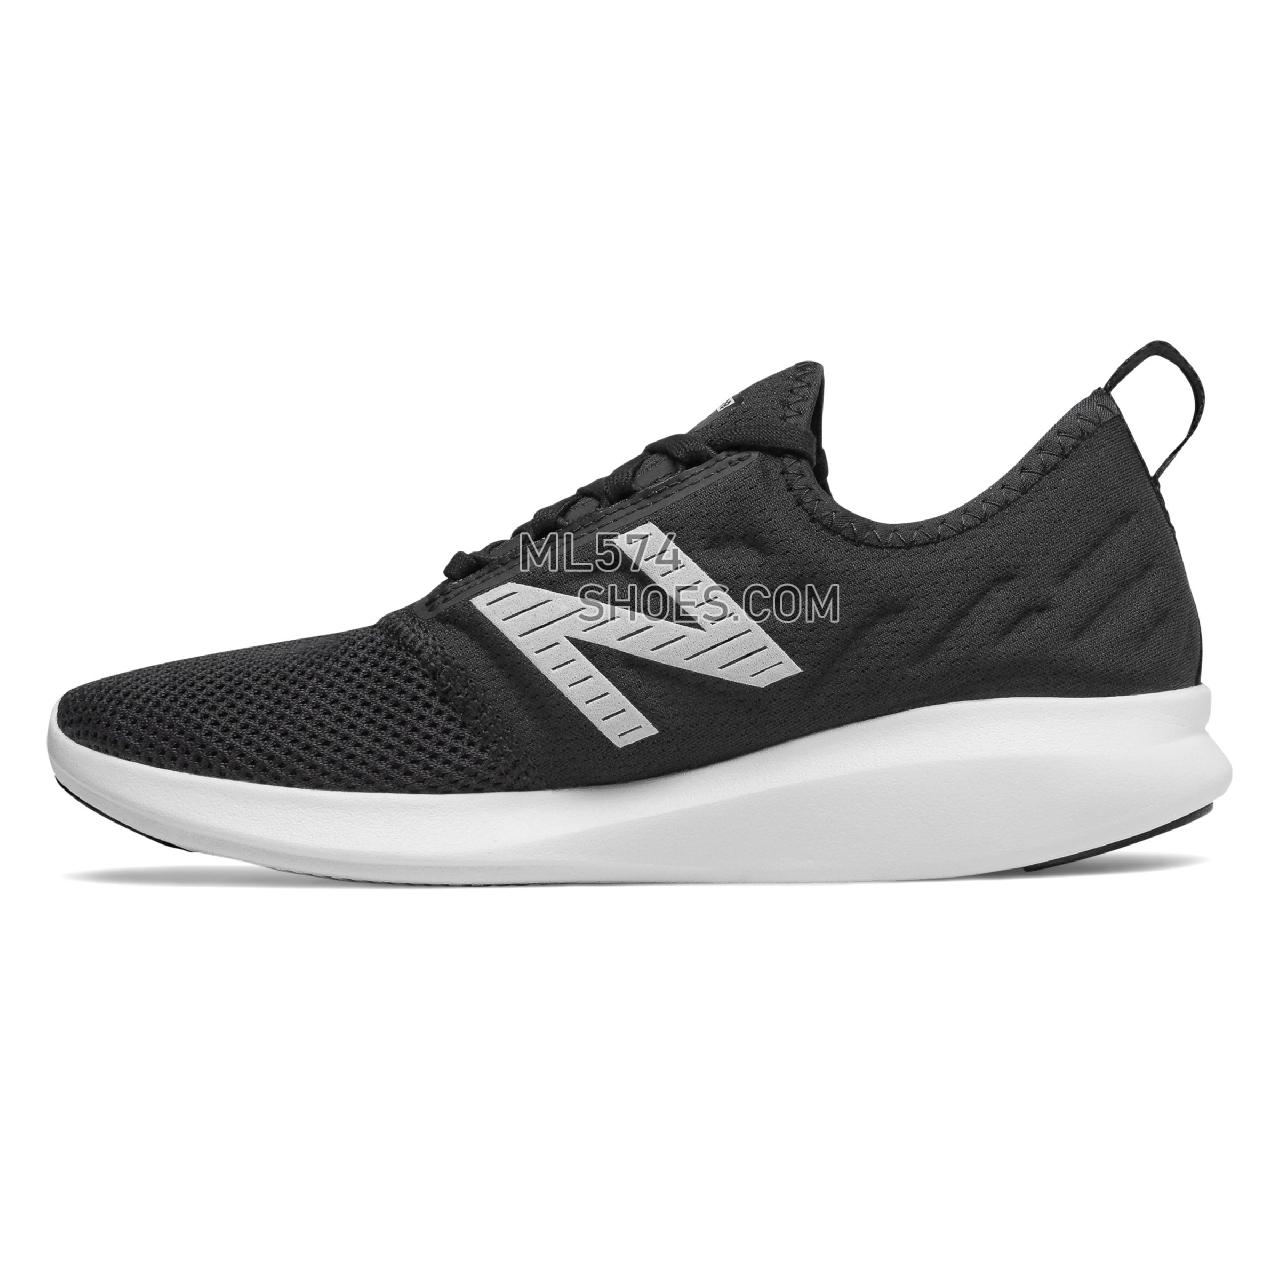 New Balance FuelCore Coast v4 - Women's 4 - Running Black with Outerspace - WCSTLLK4